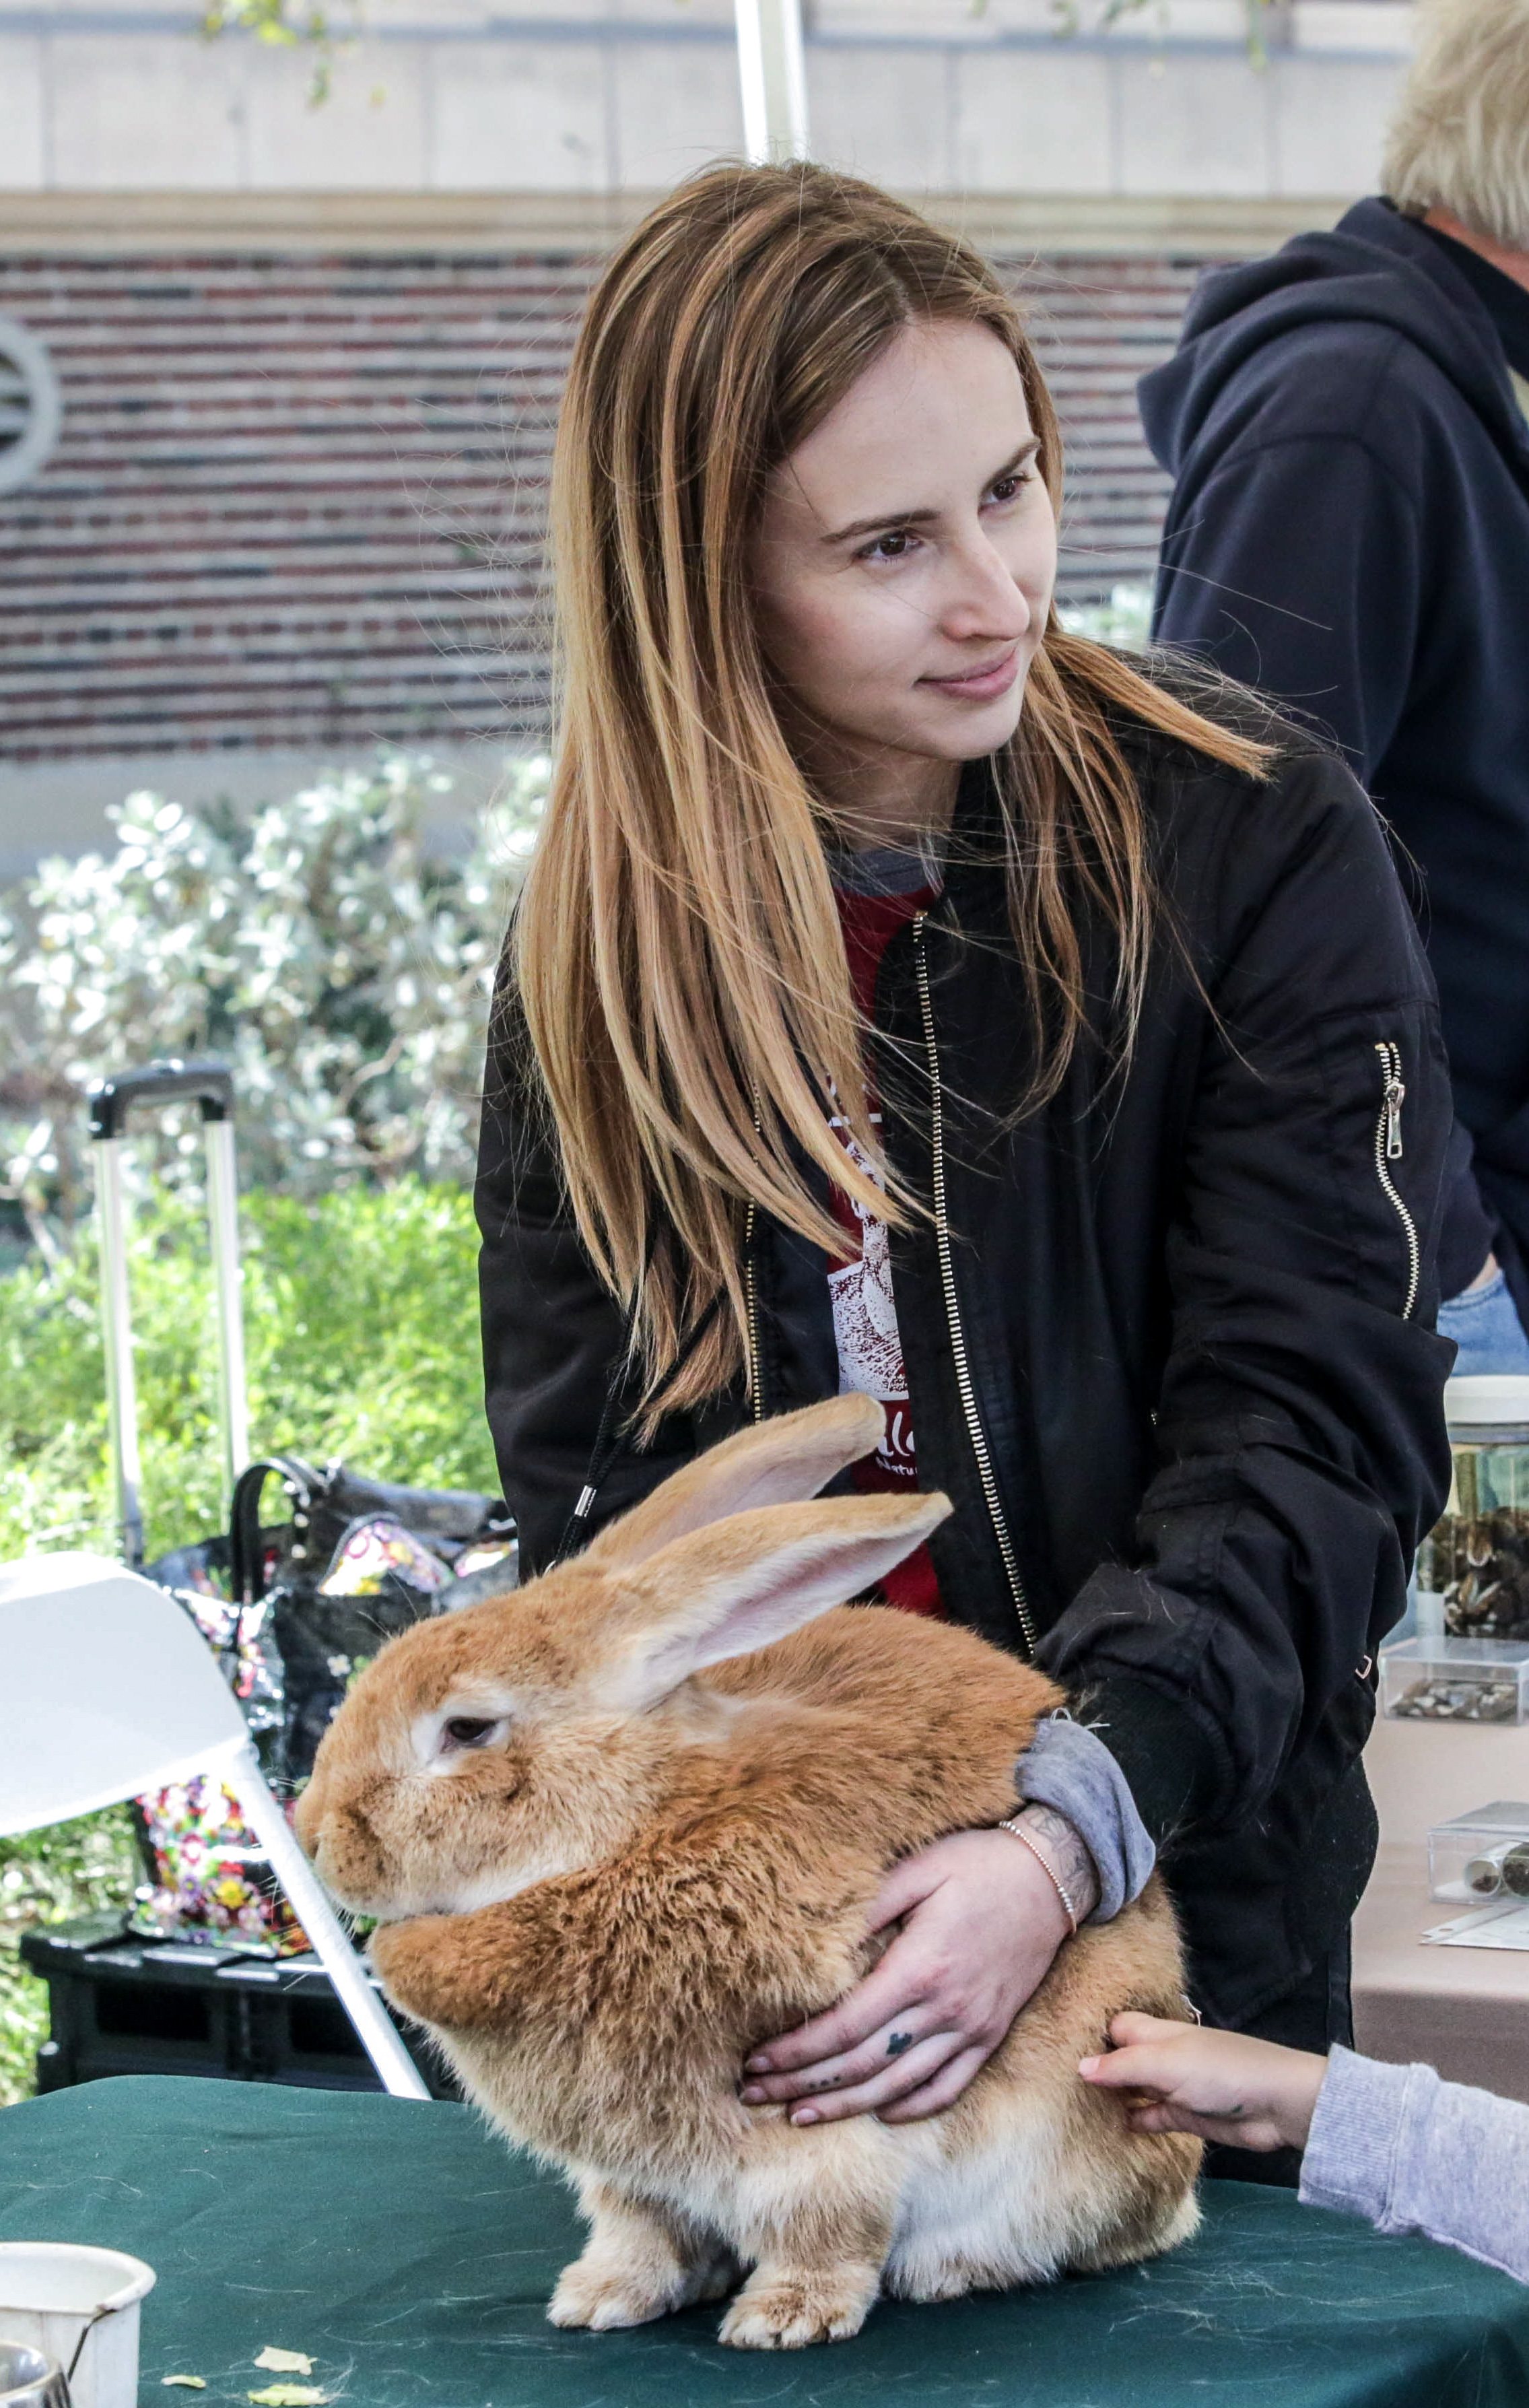  Alexis Kahn keeps hold of a Flemish Rabbit as lots of little hands reached out to pet the soft fur. The rabbit and other animals were on display at the Los Angeles Nature Fest at the Natural History Museum on the University of Southern California ca